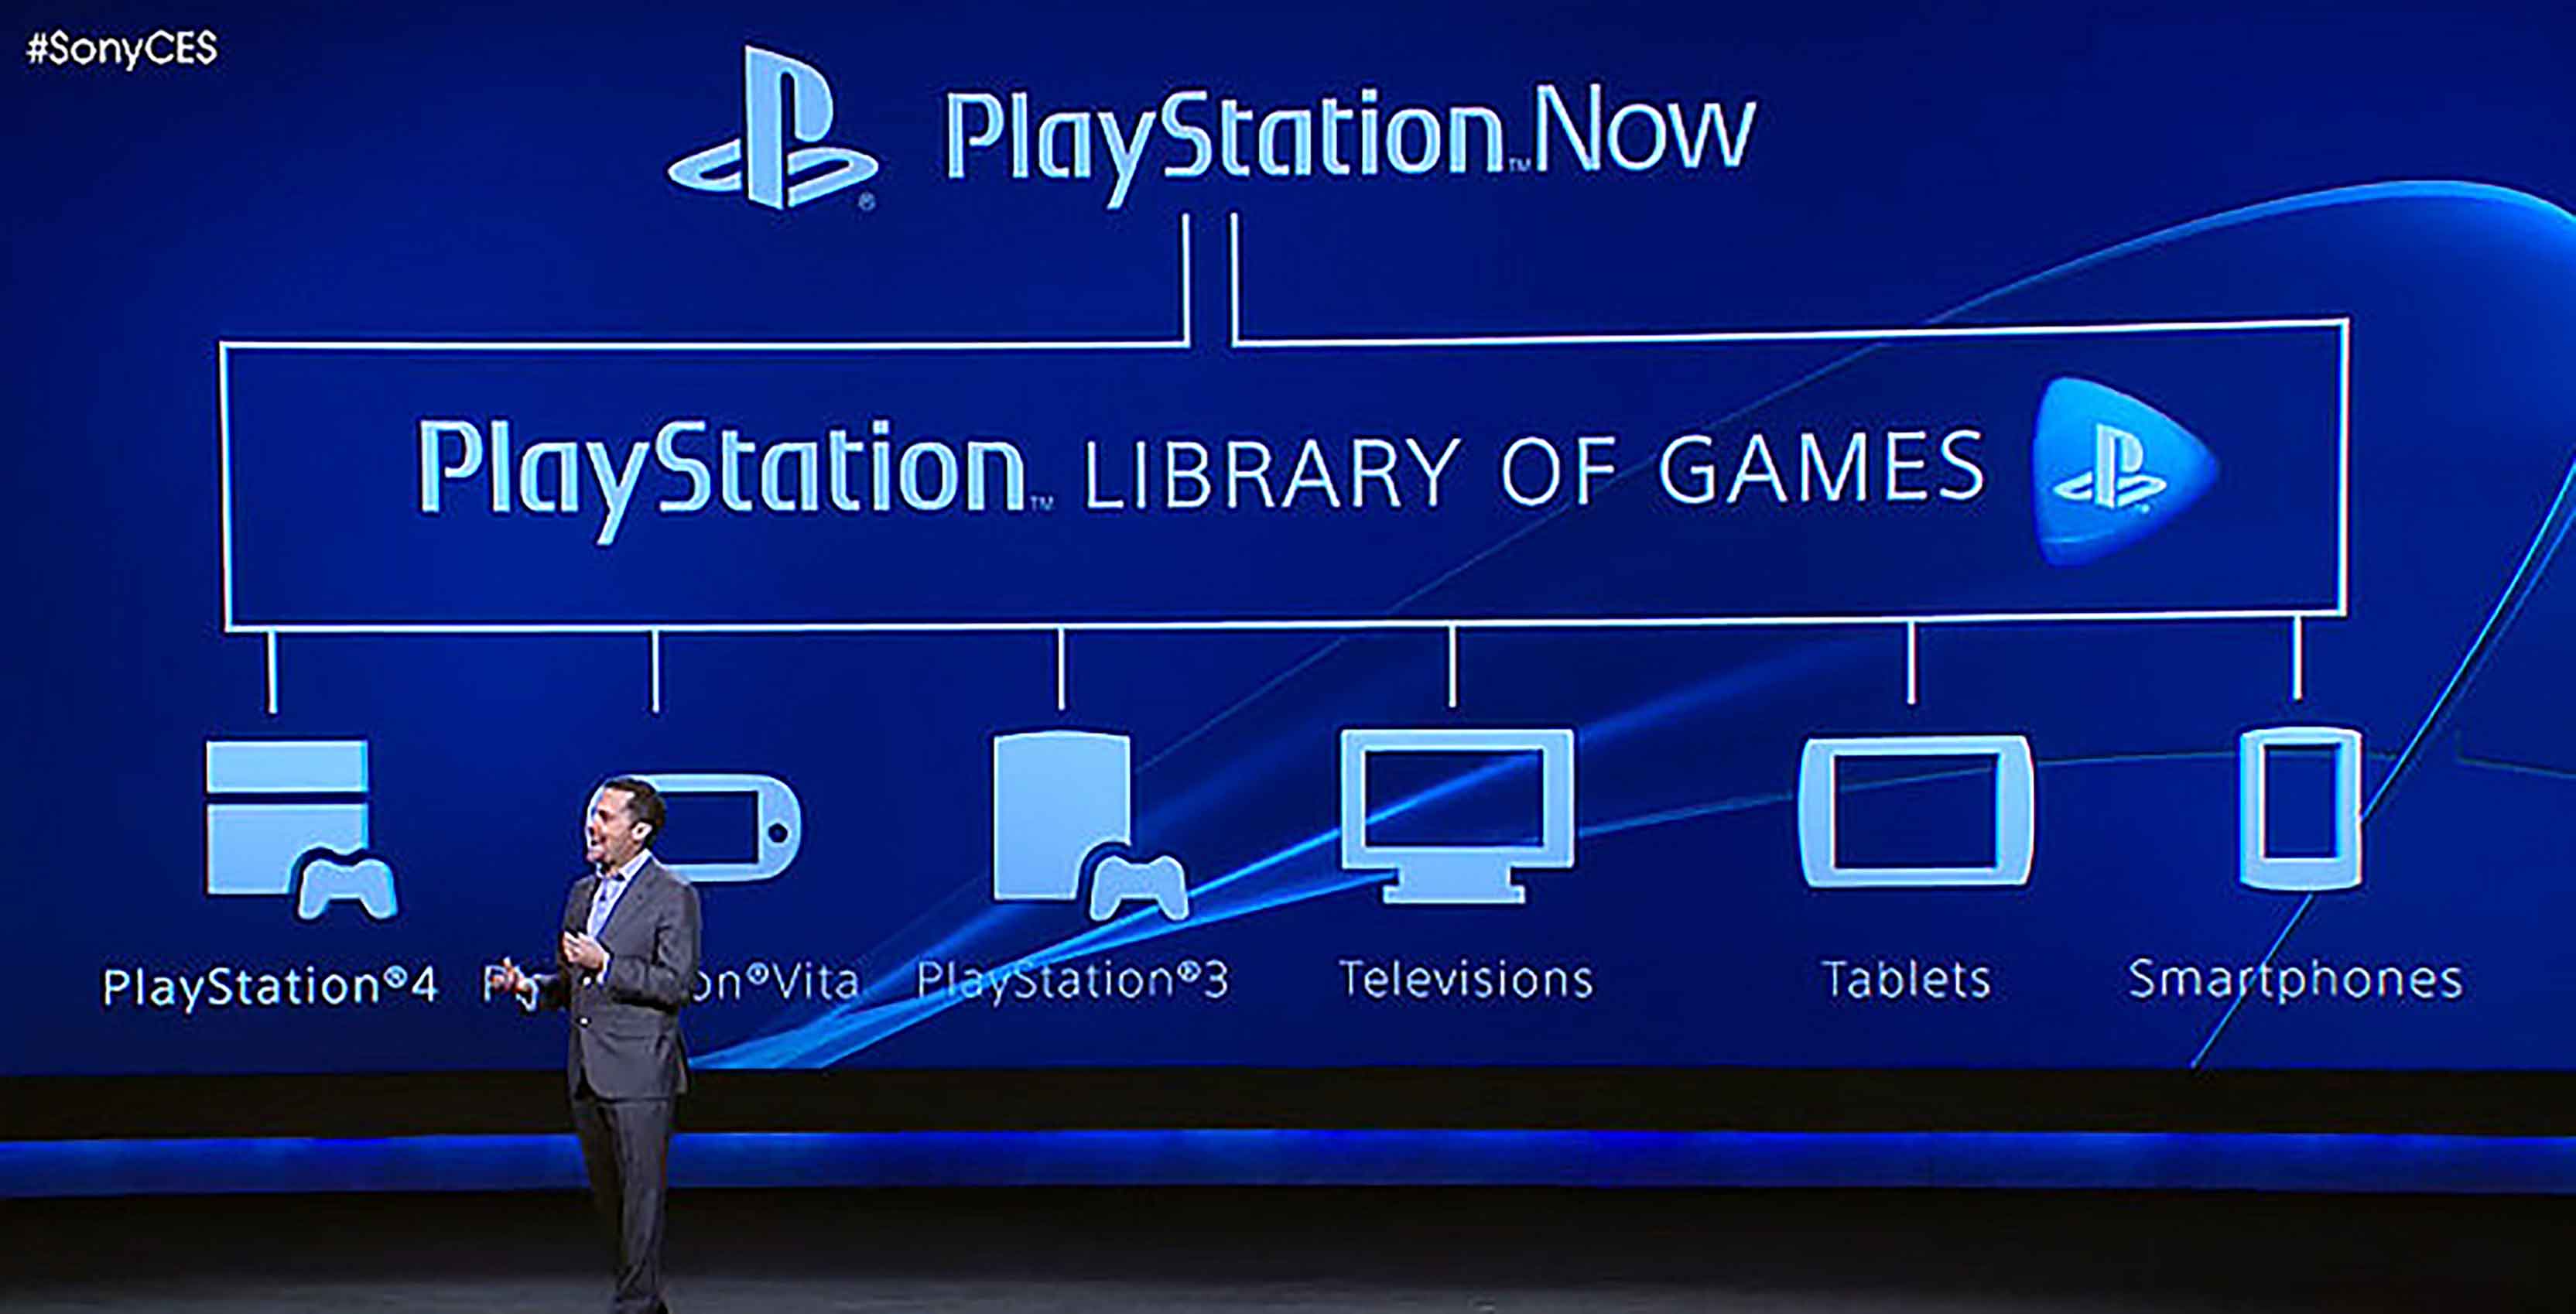 PlayStation Now announcement